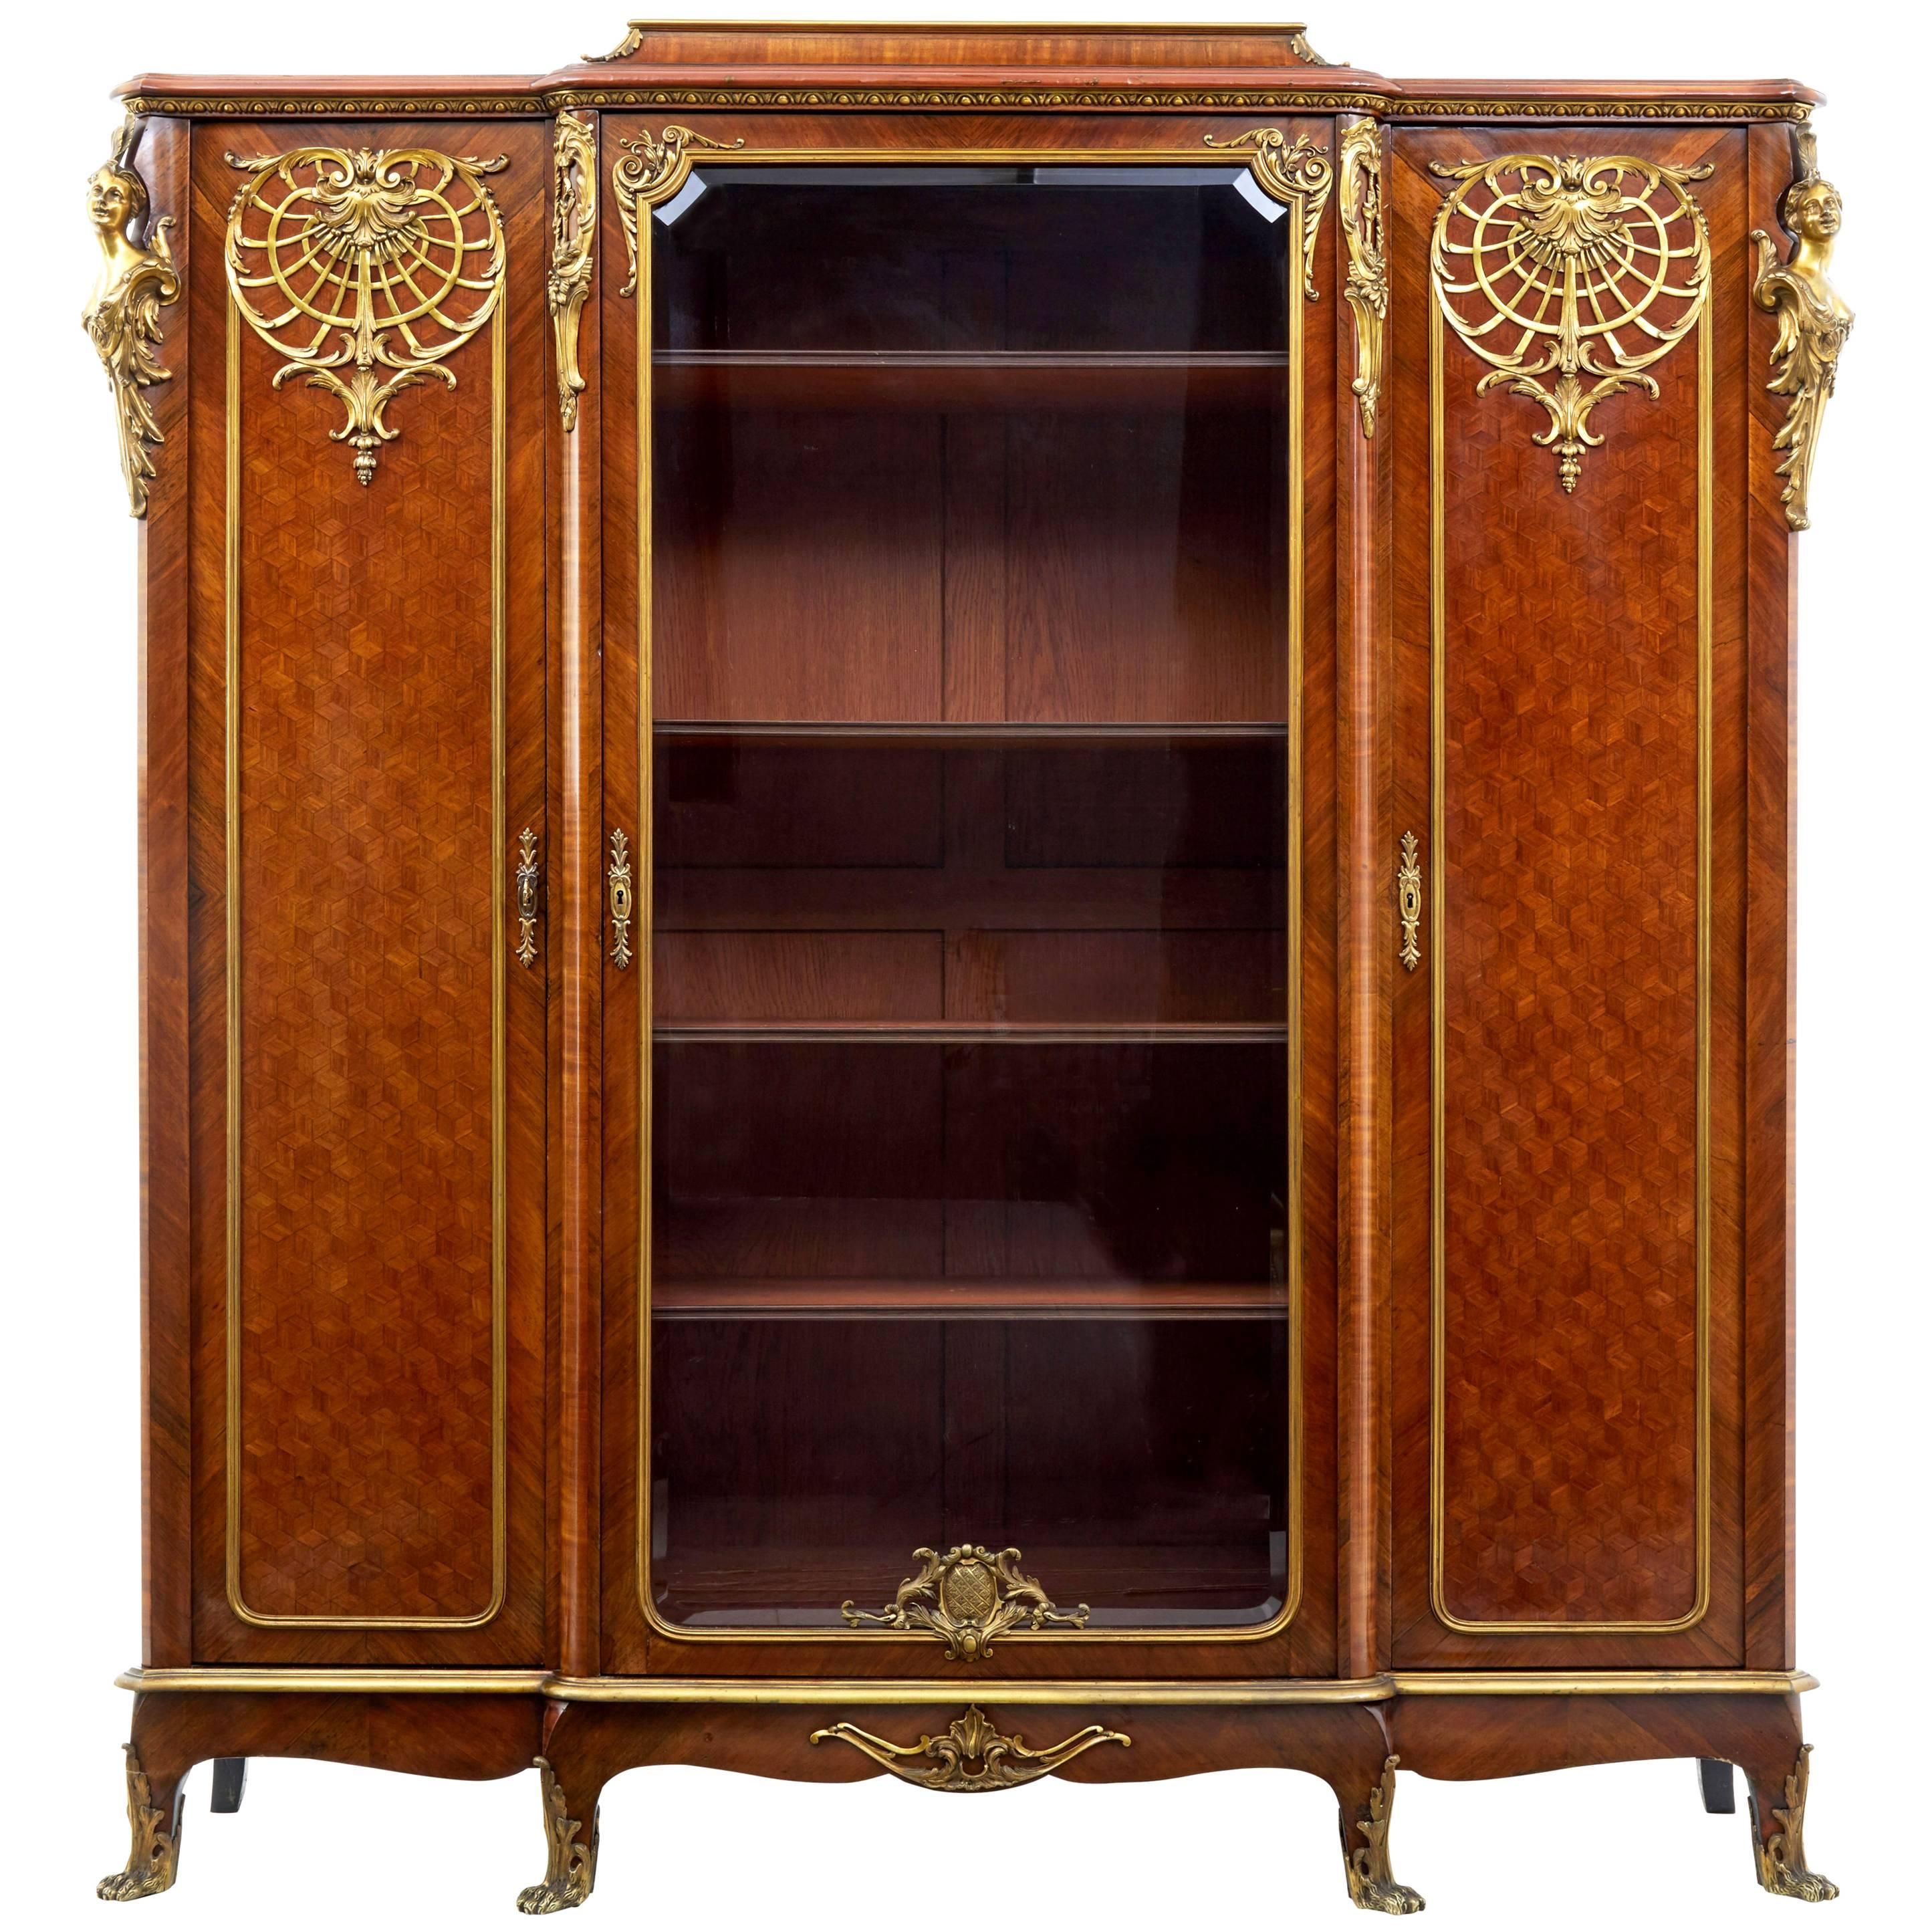 Late 19th Century French Kingwood and Ormolu Bibliotheque Cabinet